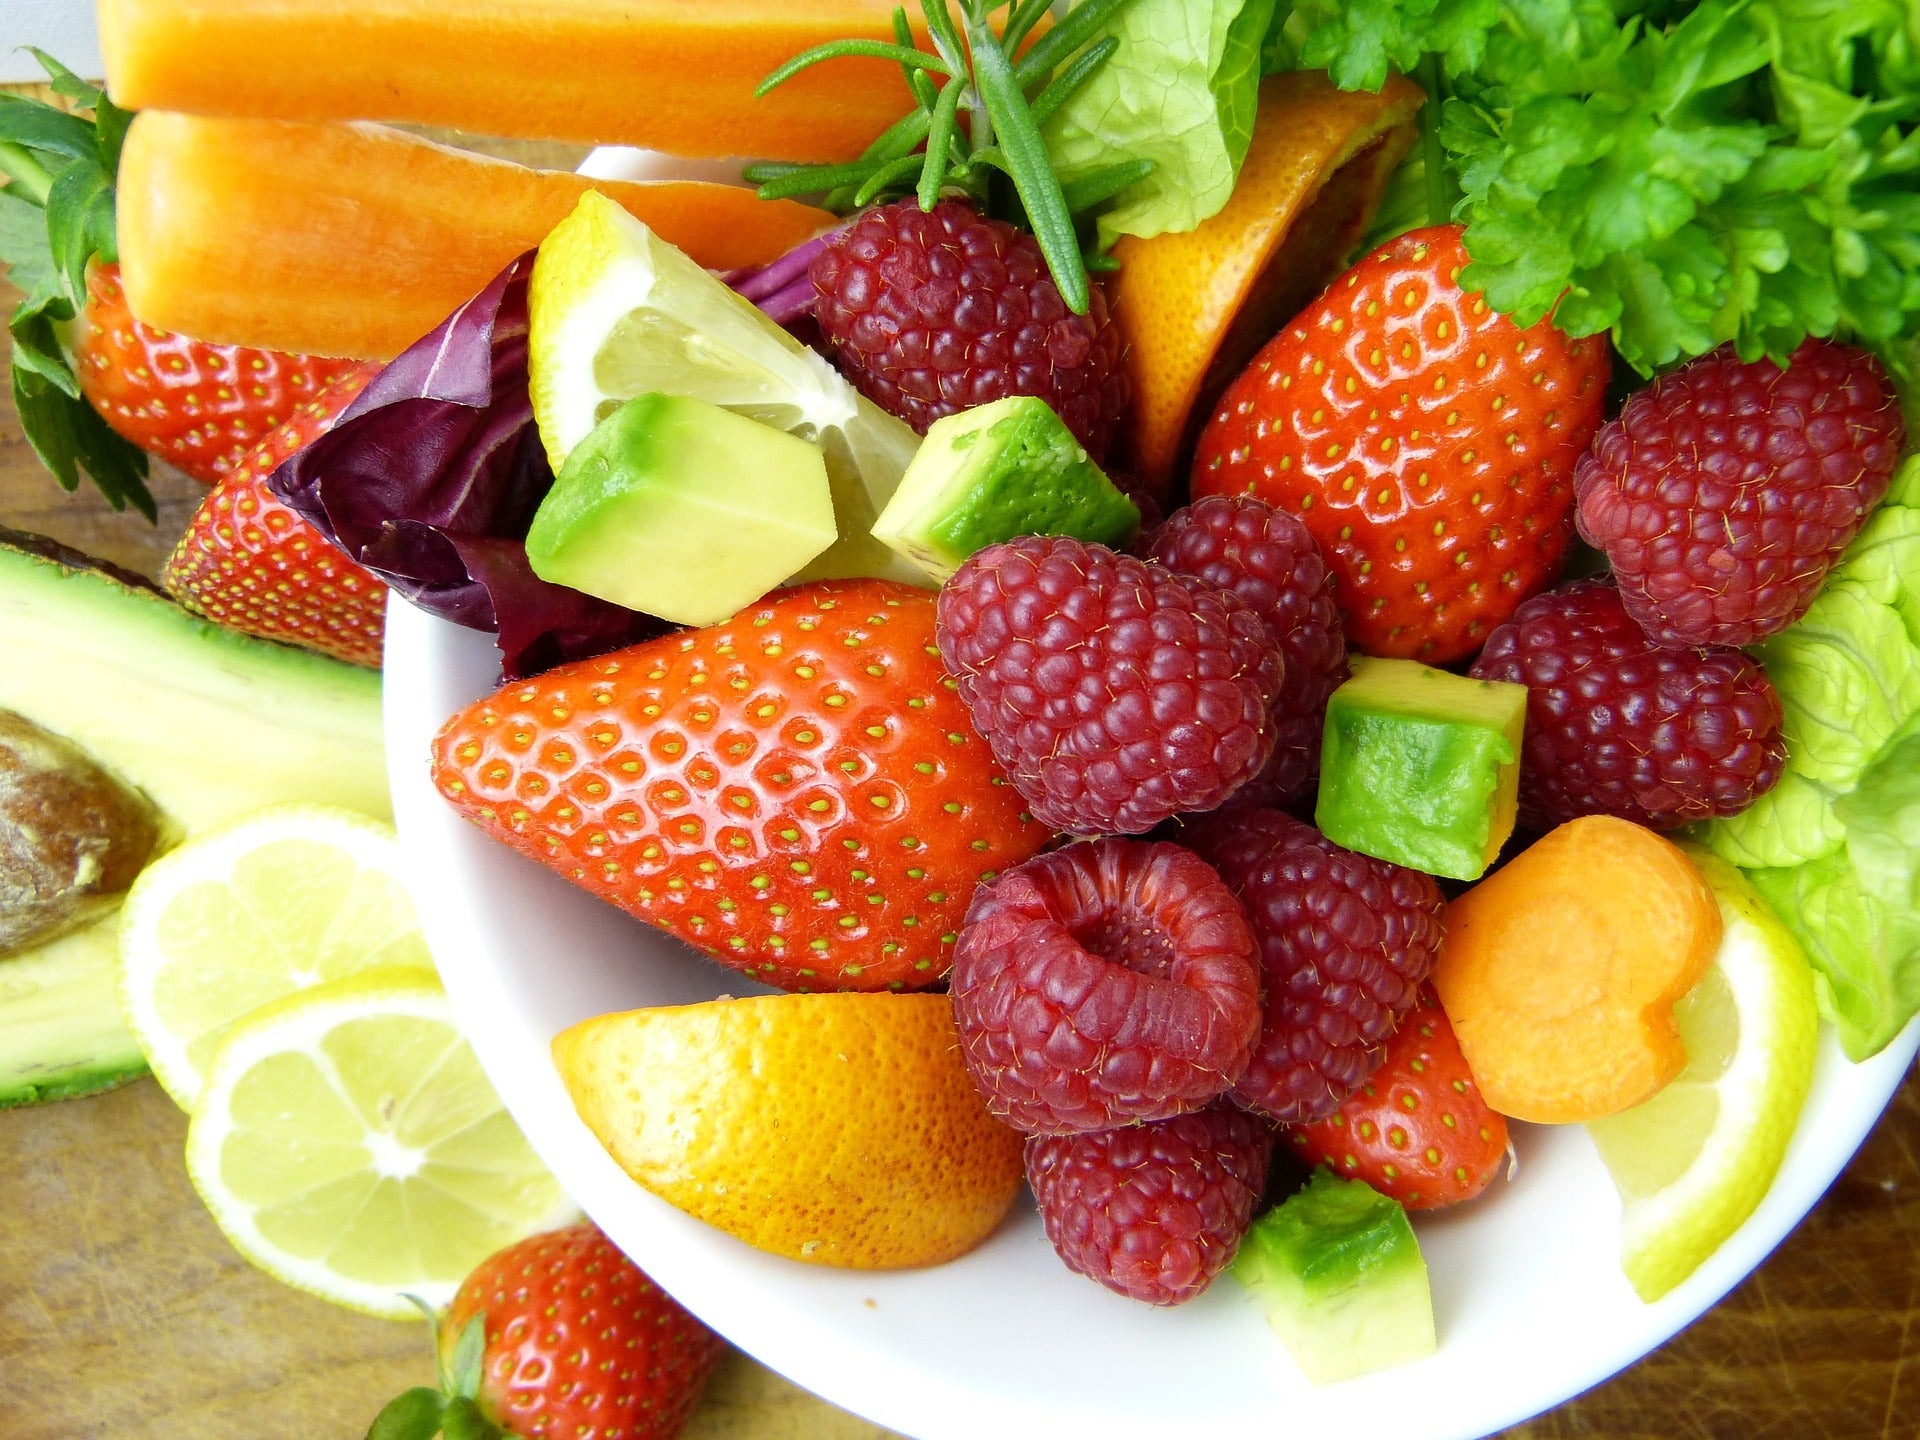 Major Types of Fruits You Should Be Eating